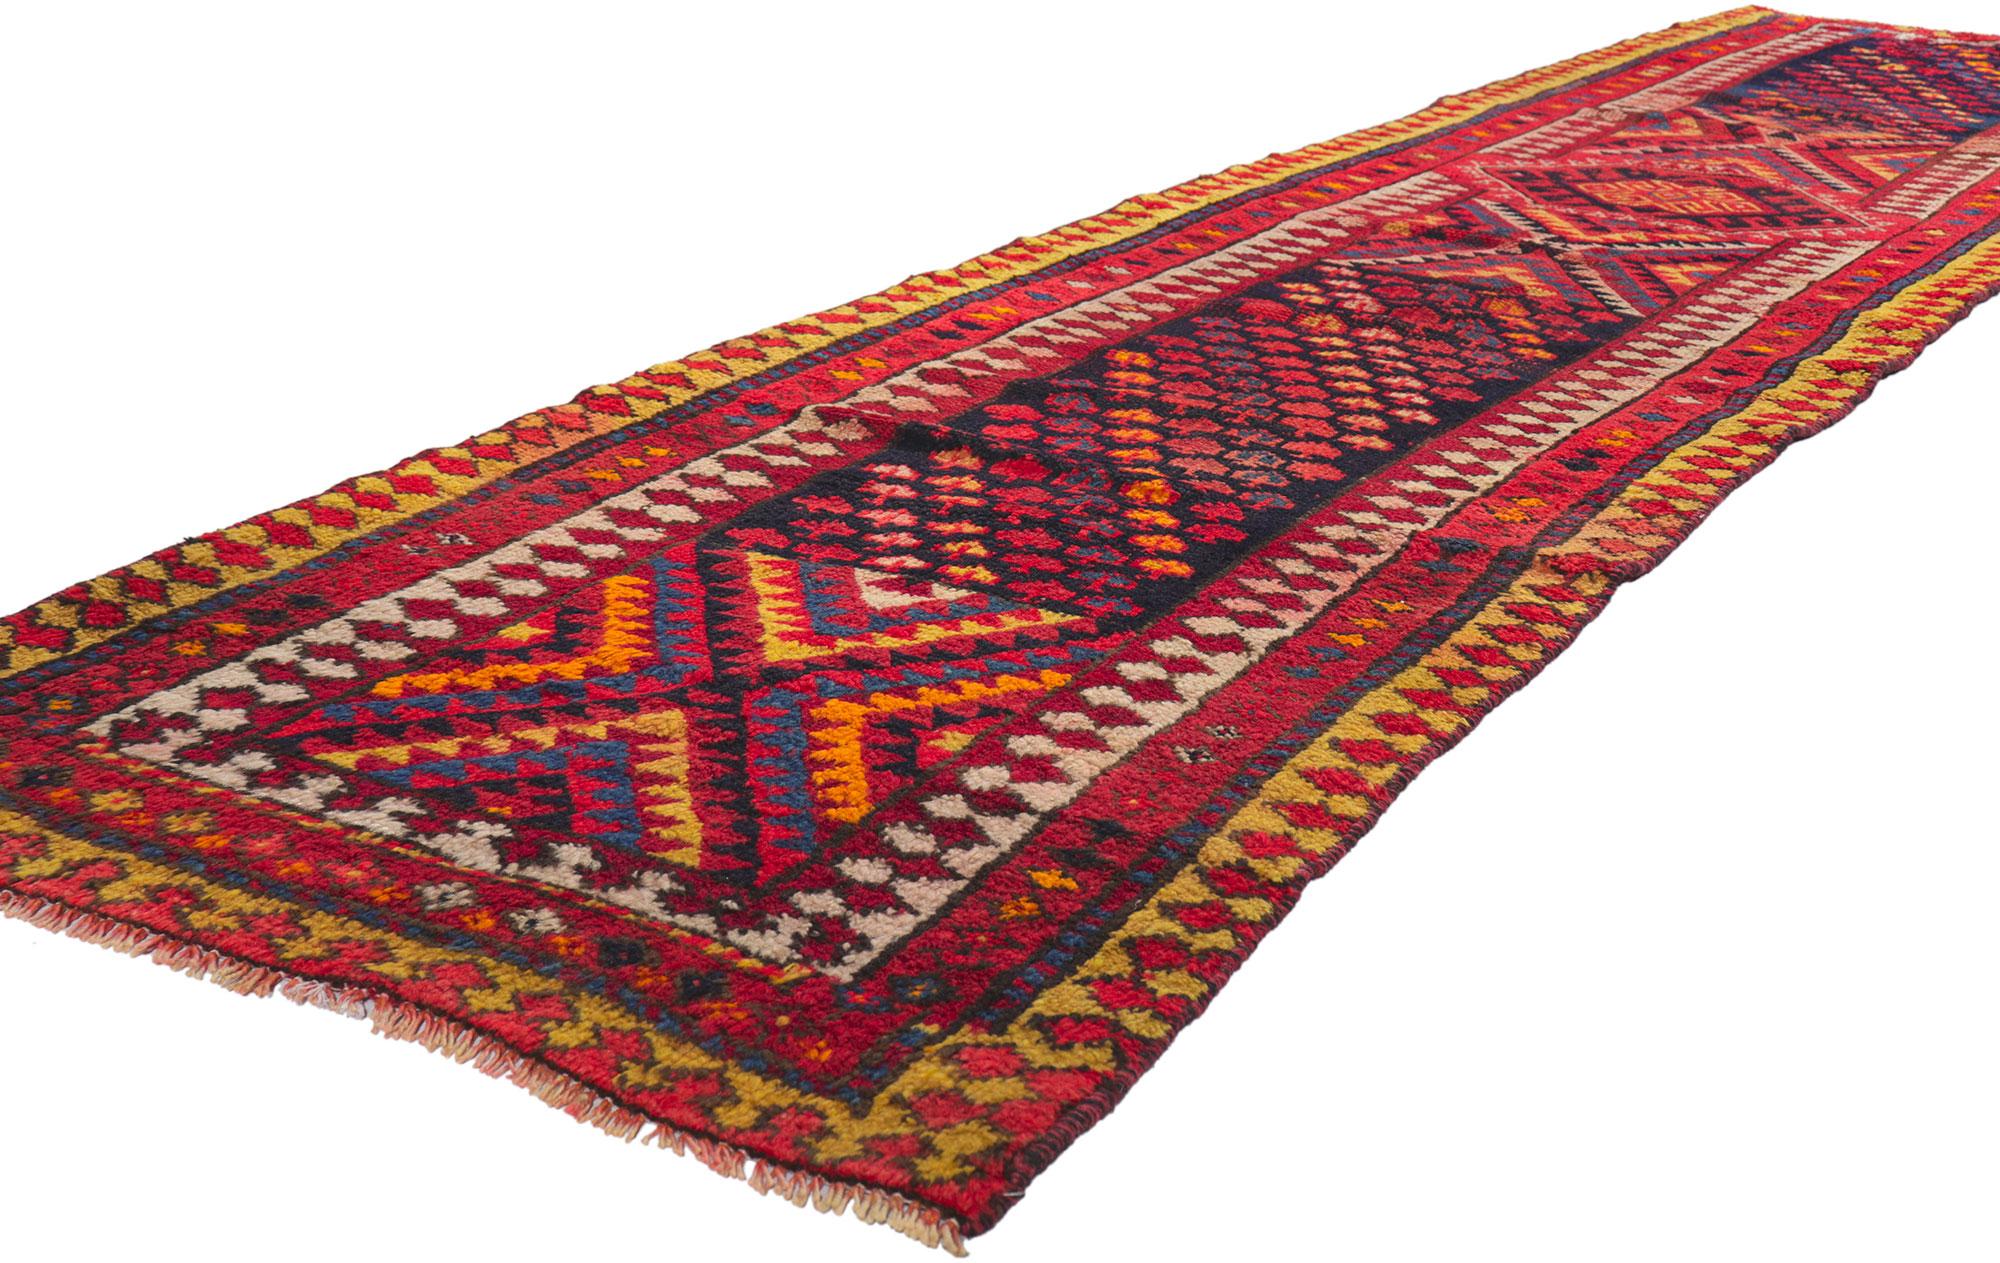 Full of tiny details and nomadic charm, this hand knotted wool vintage Persian Shiraz runner is a captivating vision of woven beauty. The eye-catching tribal design and lively colors woven into this vintage Shiraz rug work together creating a truly